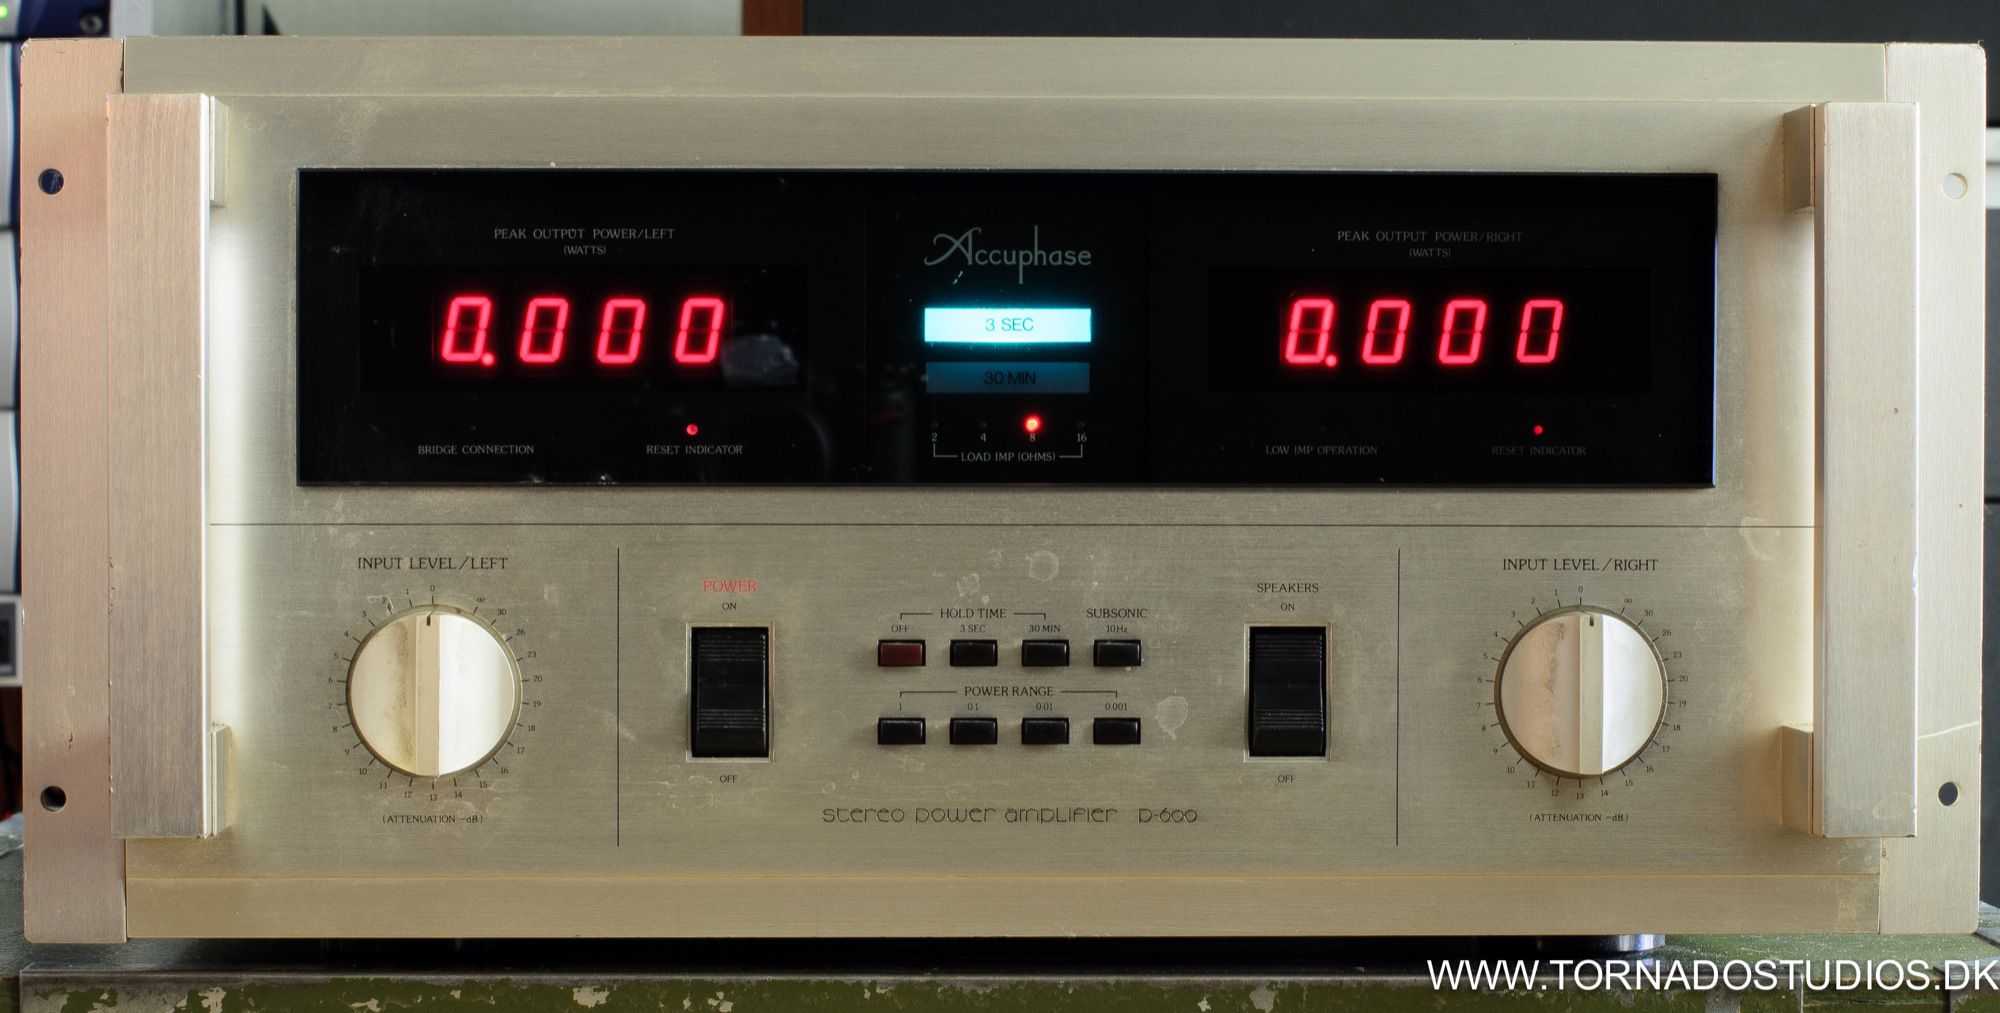 Yamaha NS-10, Accuphase D600 amp